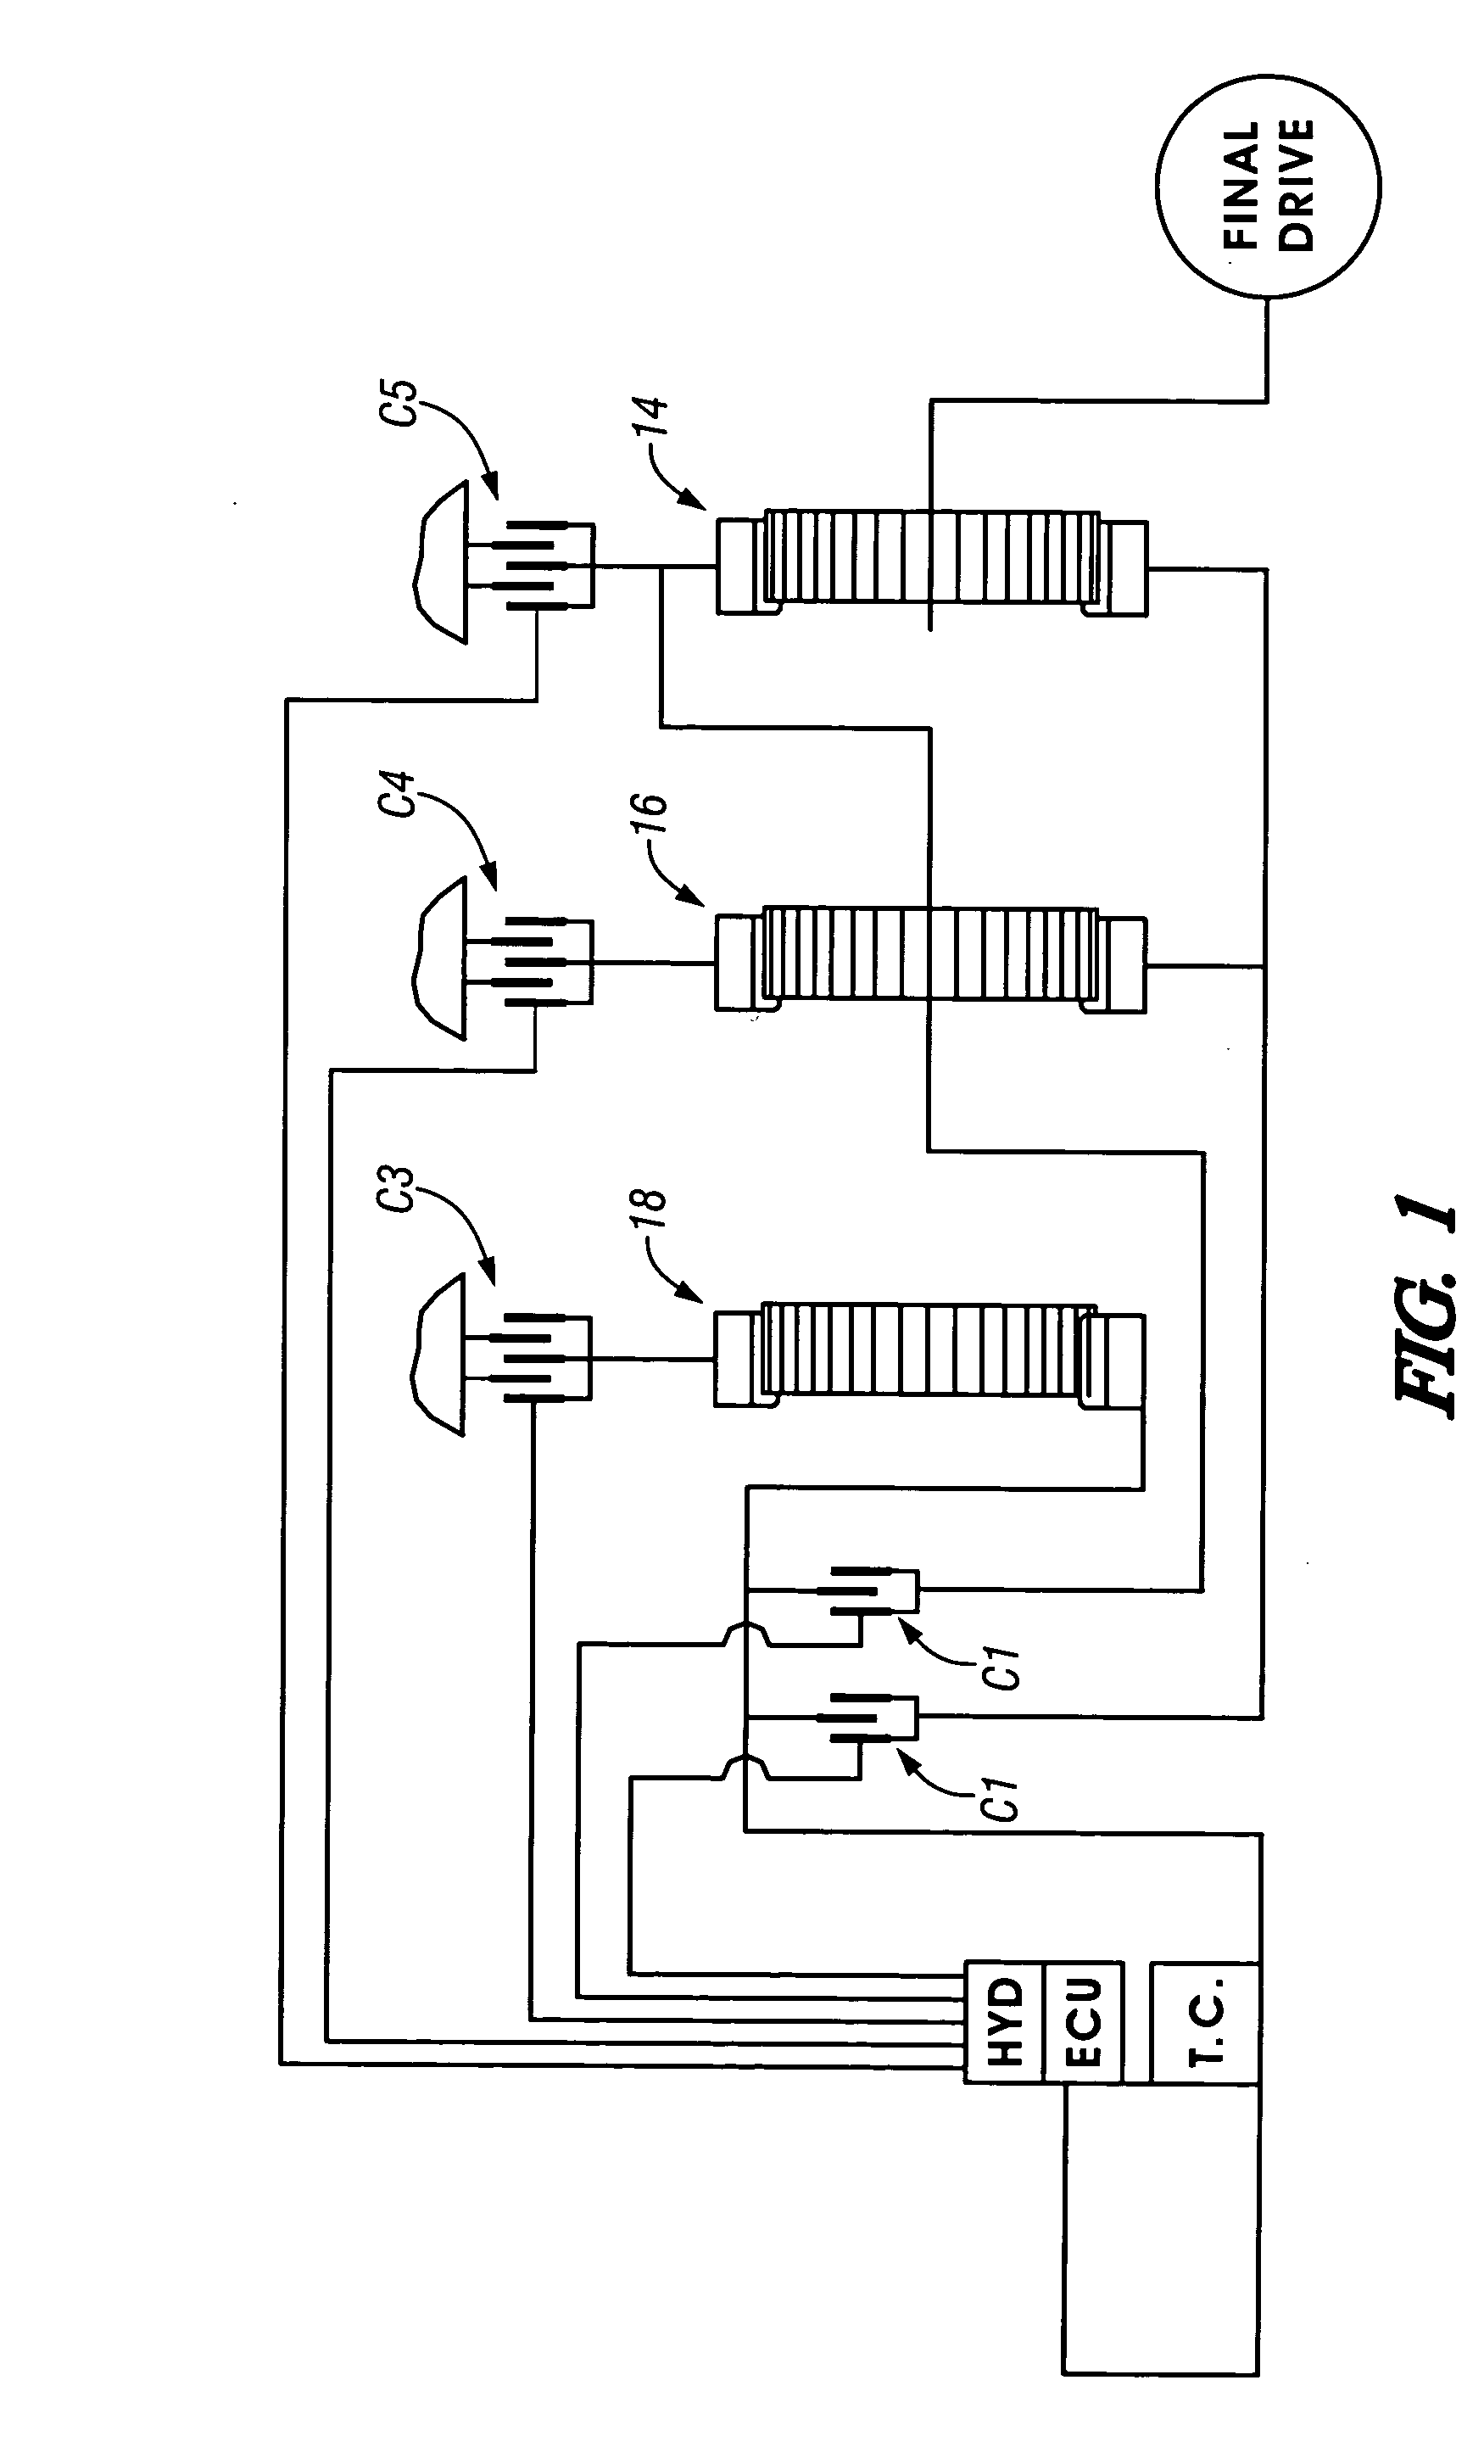 Fly-by-wire limp home and multi-plex system